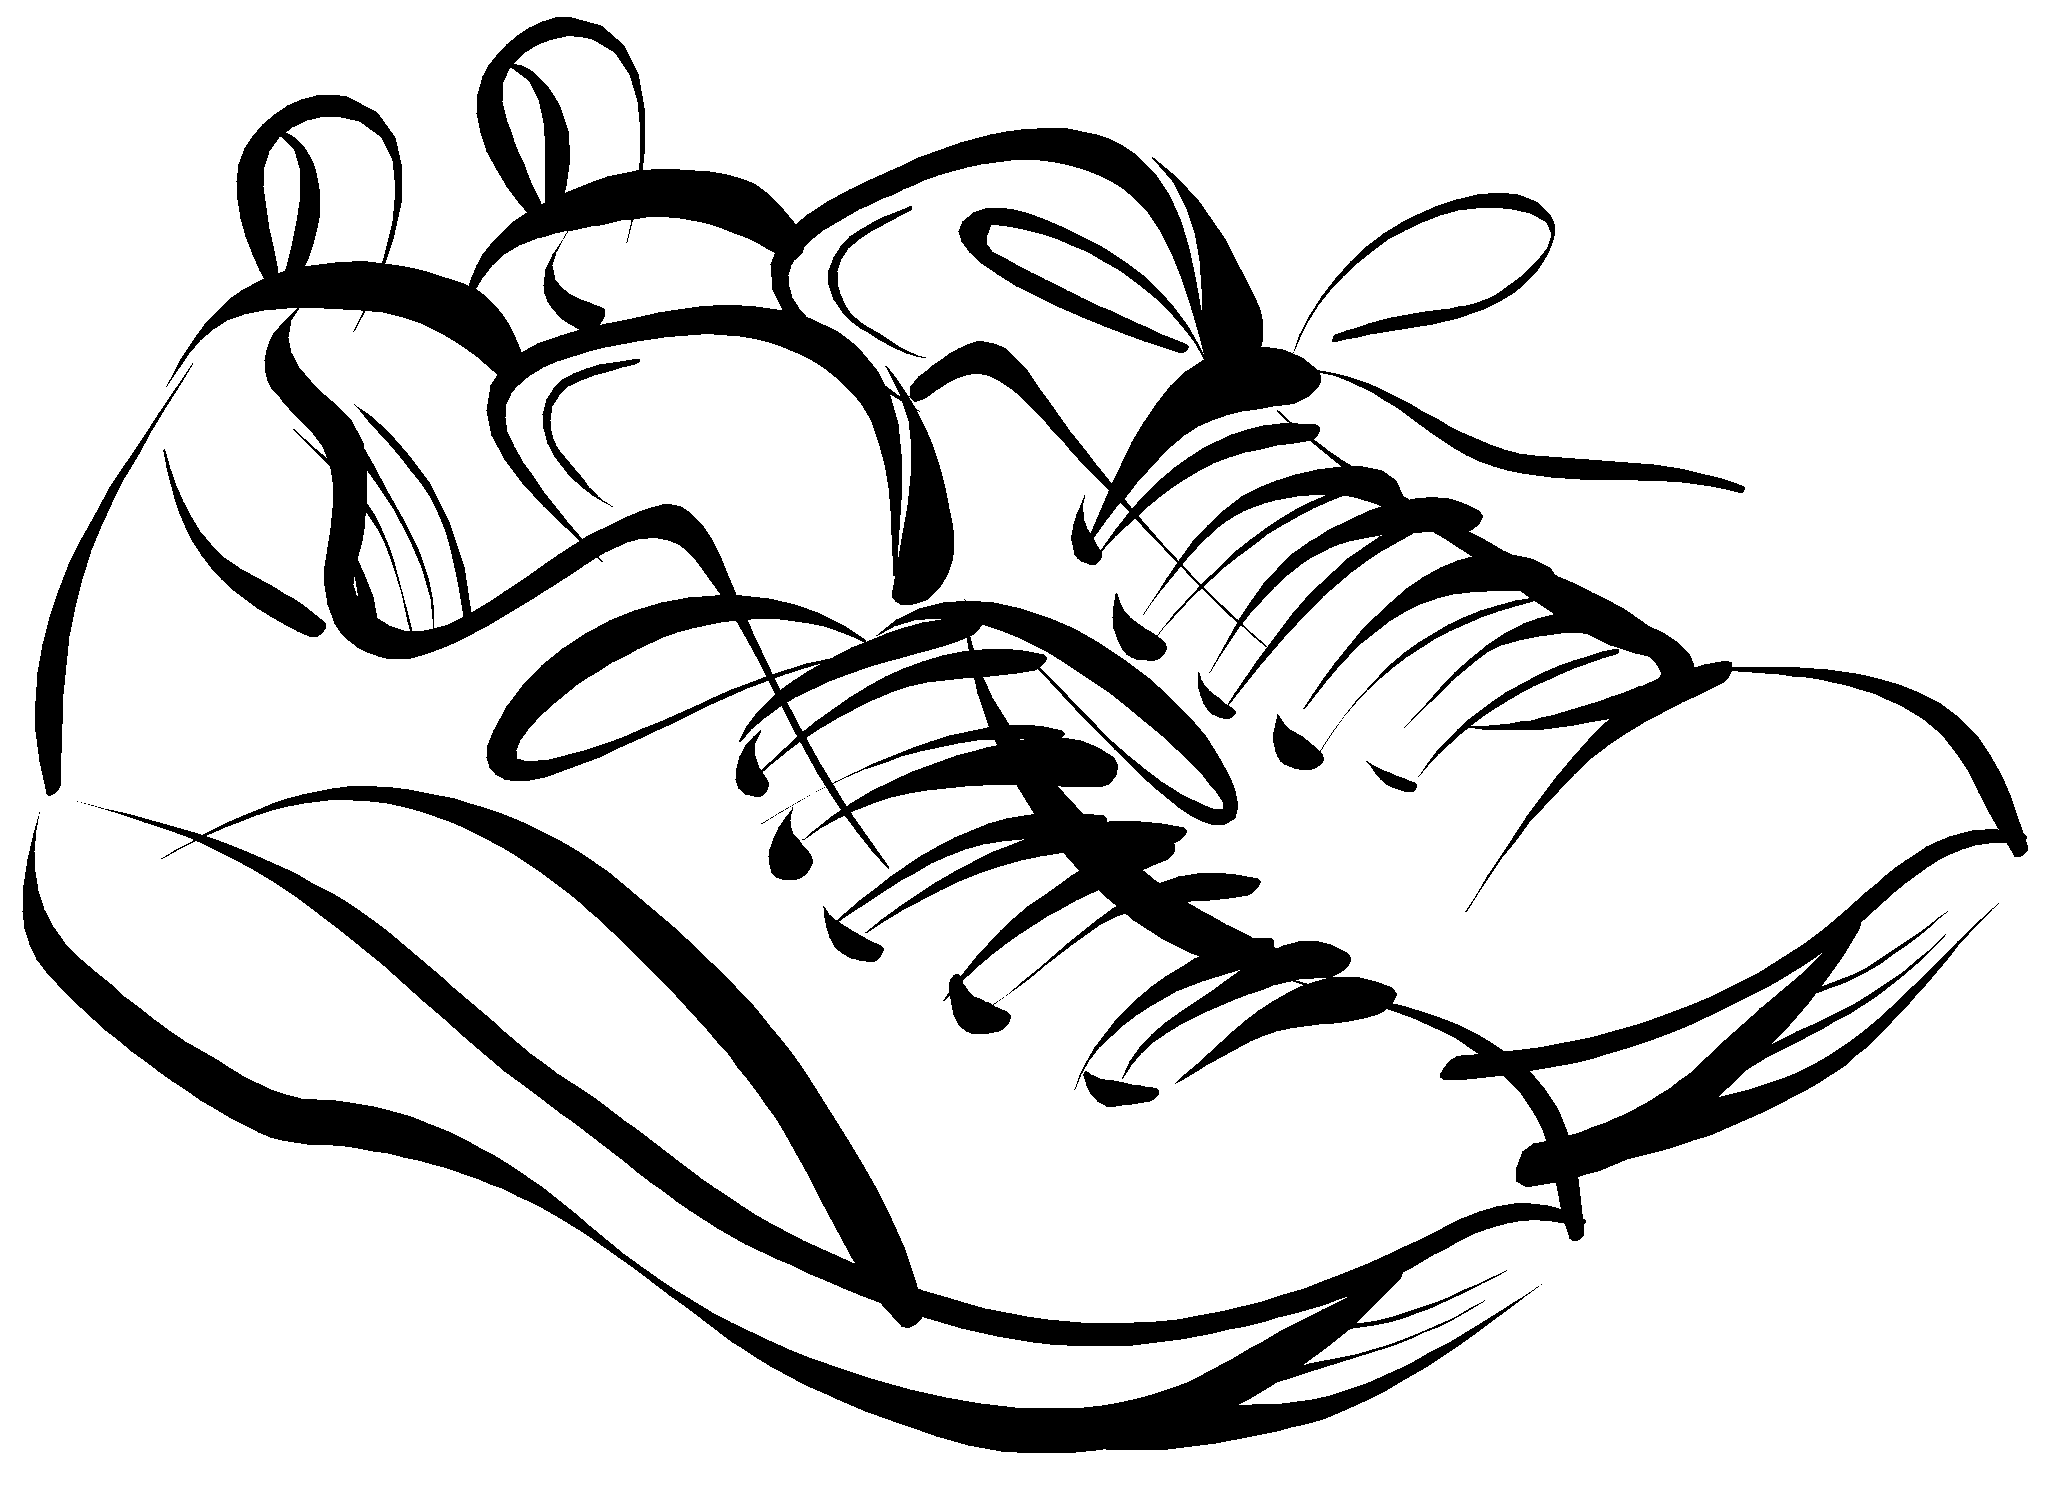 Runners Shoe Drawing - ClipArt Best